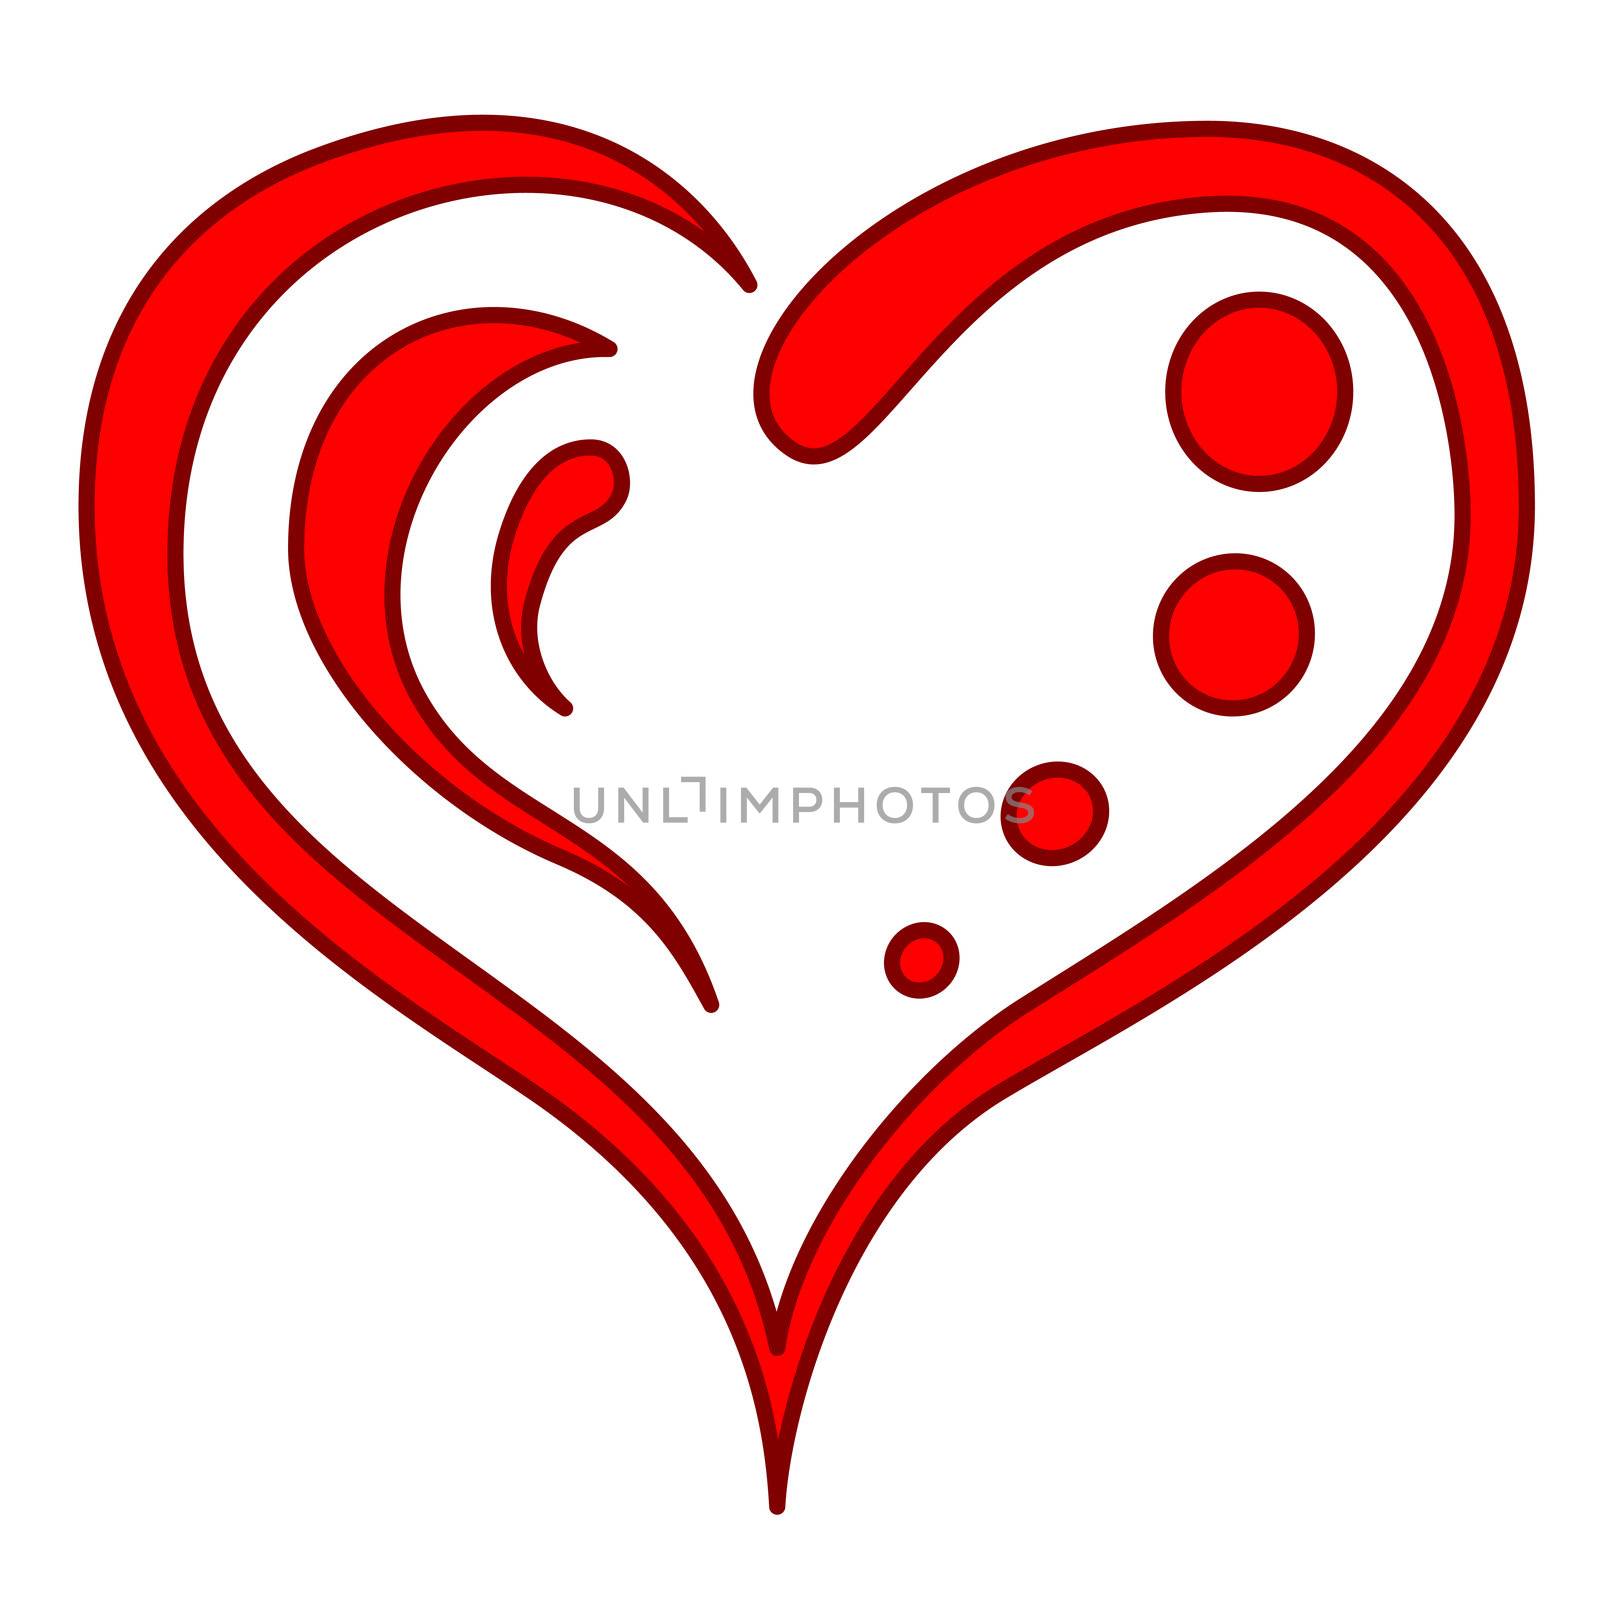 Red heart, silhouette. Symbolical sign on love and friendship